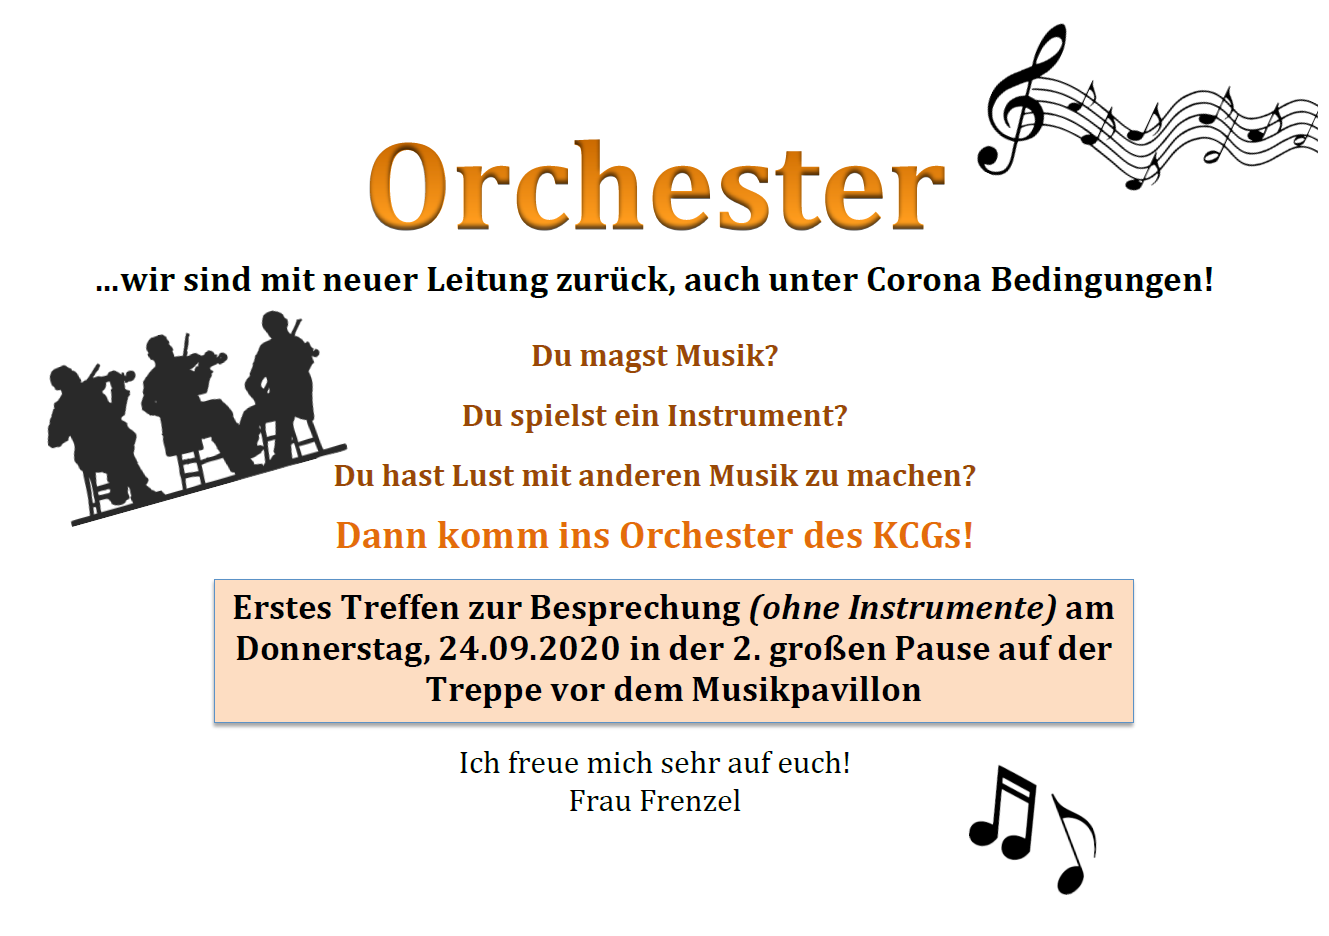 Orchester2020 21